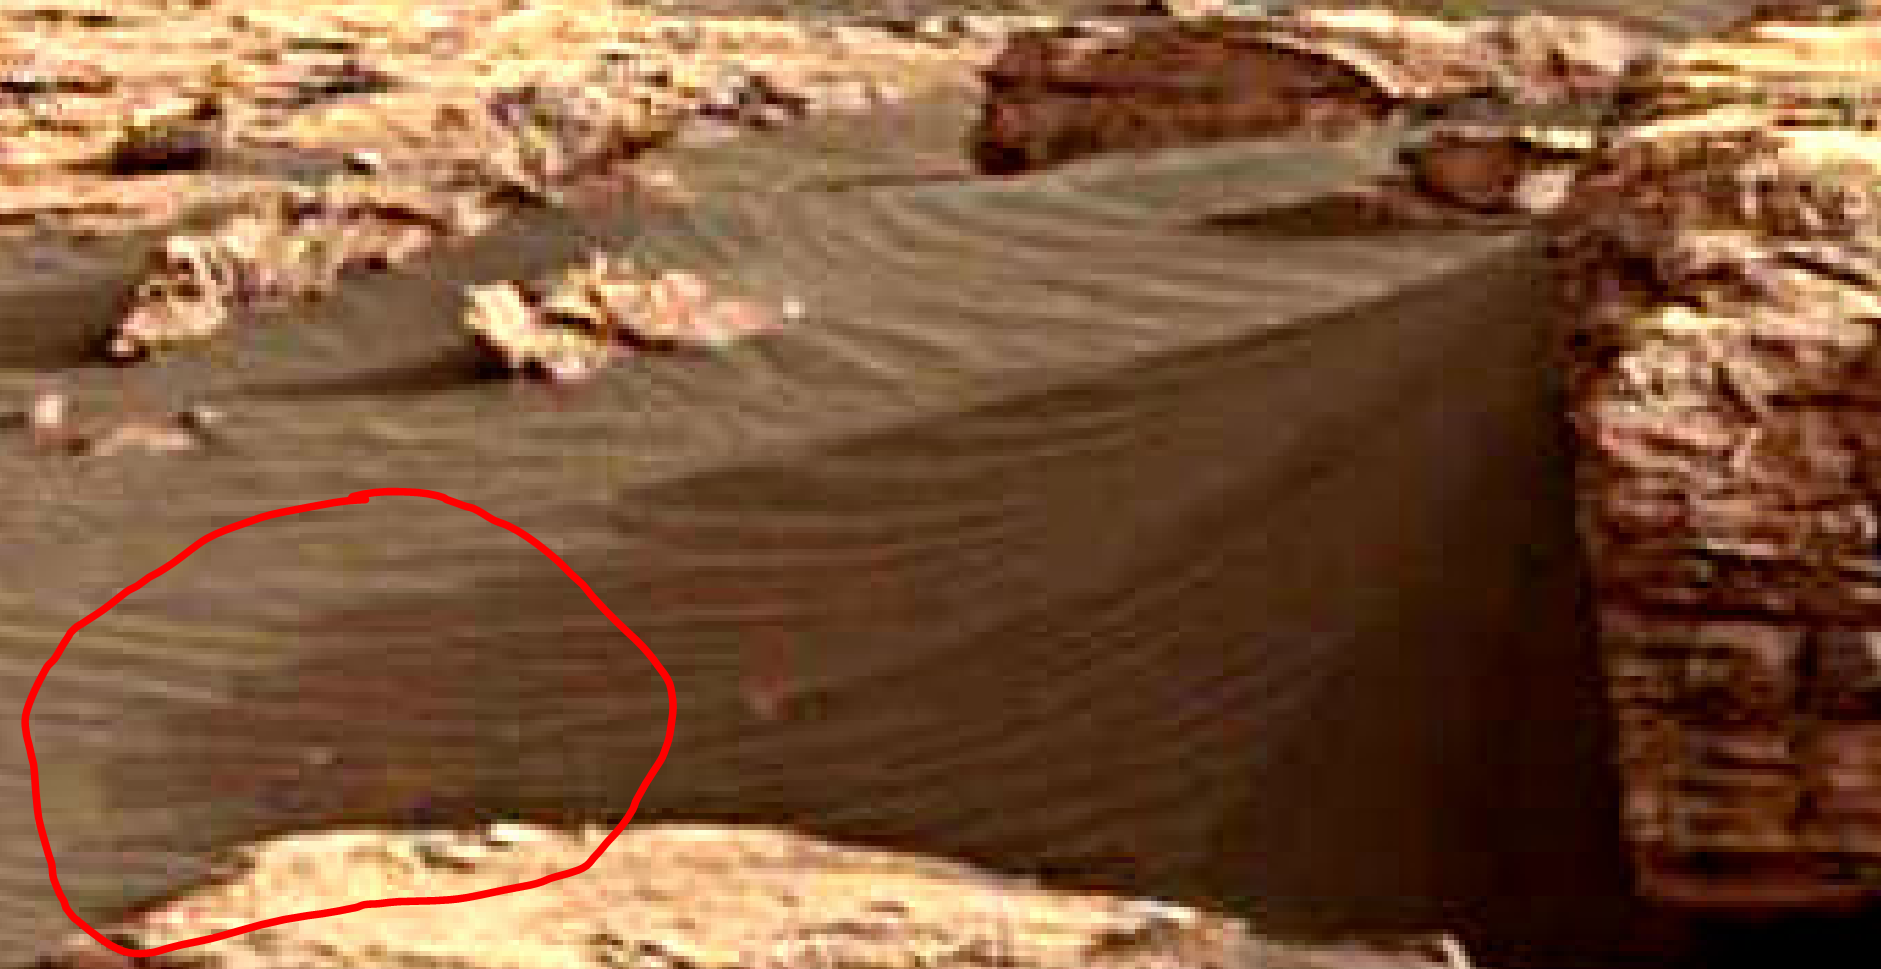 mars-sol-1512-anomaly-artifacts-6-was-life-on-mars